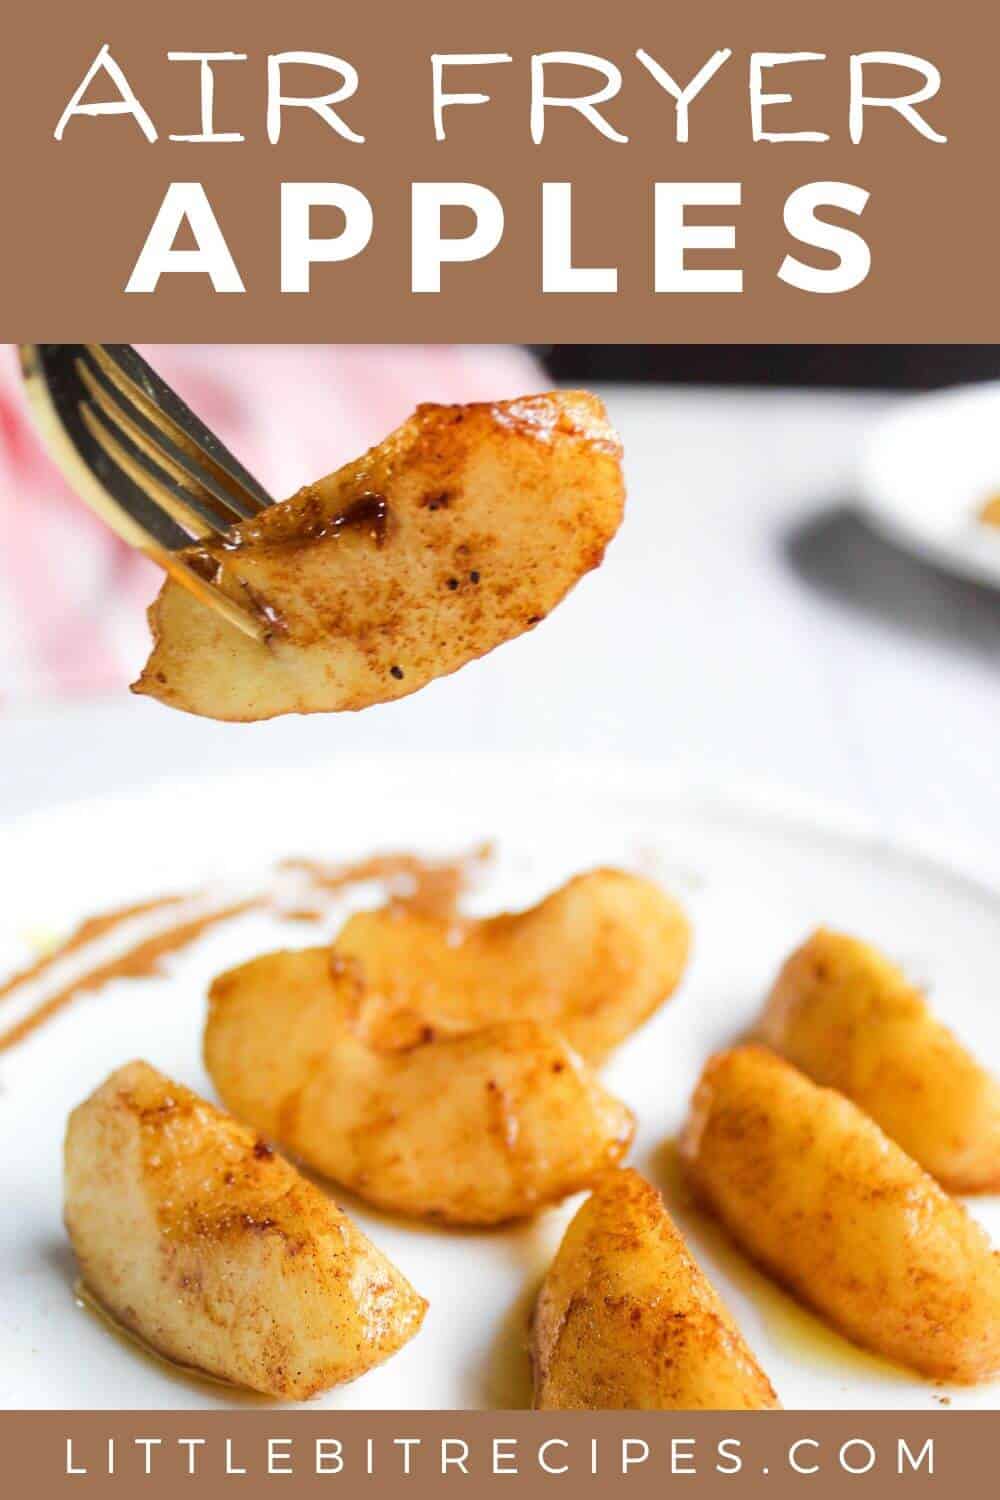 Air fryer apples with text.